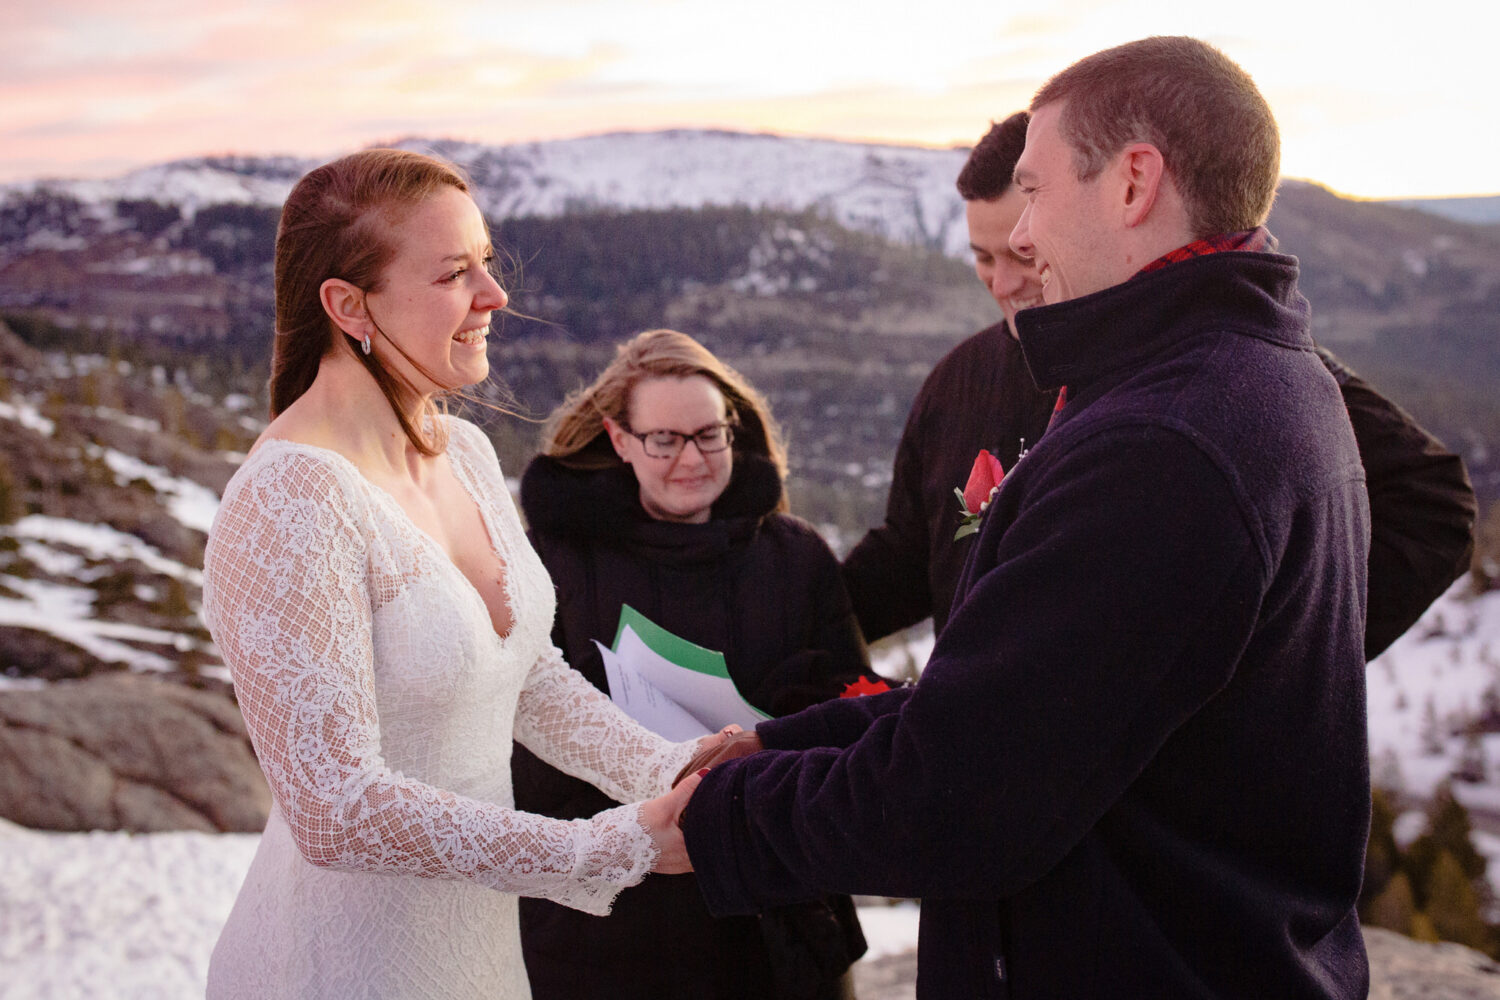 Exchanging vows at a mountaintop elopement in Lake Tahoe.